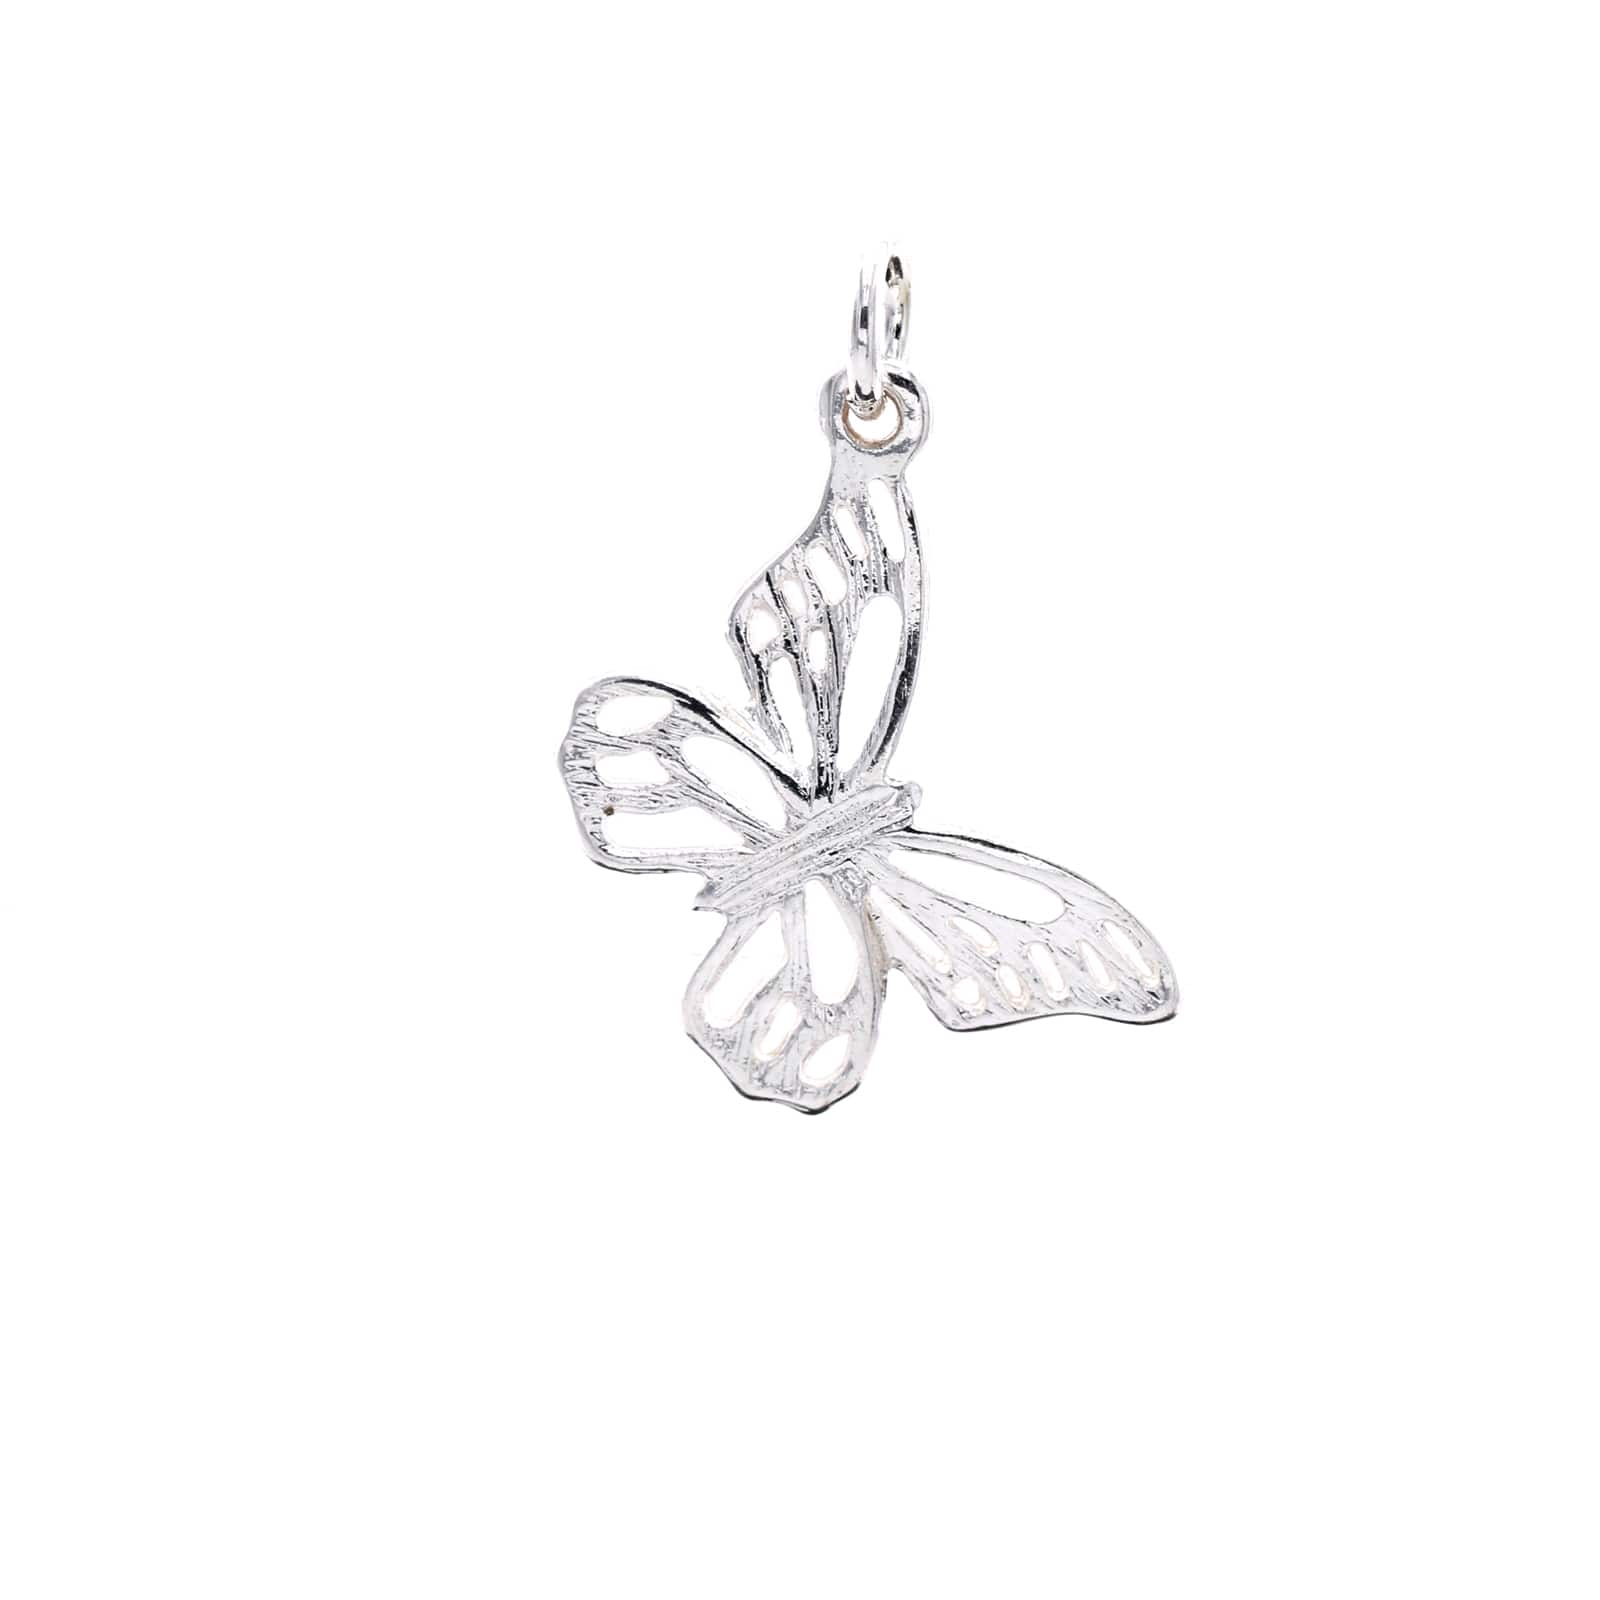 Papillon Charm Bead - Michael Gallagher Jewelers